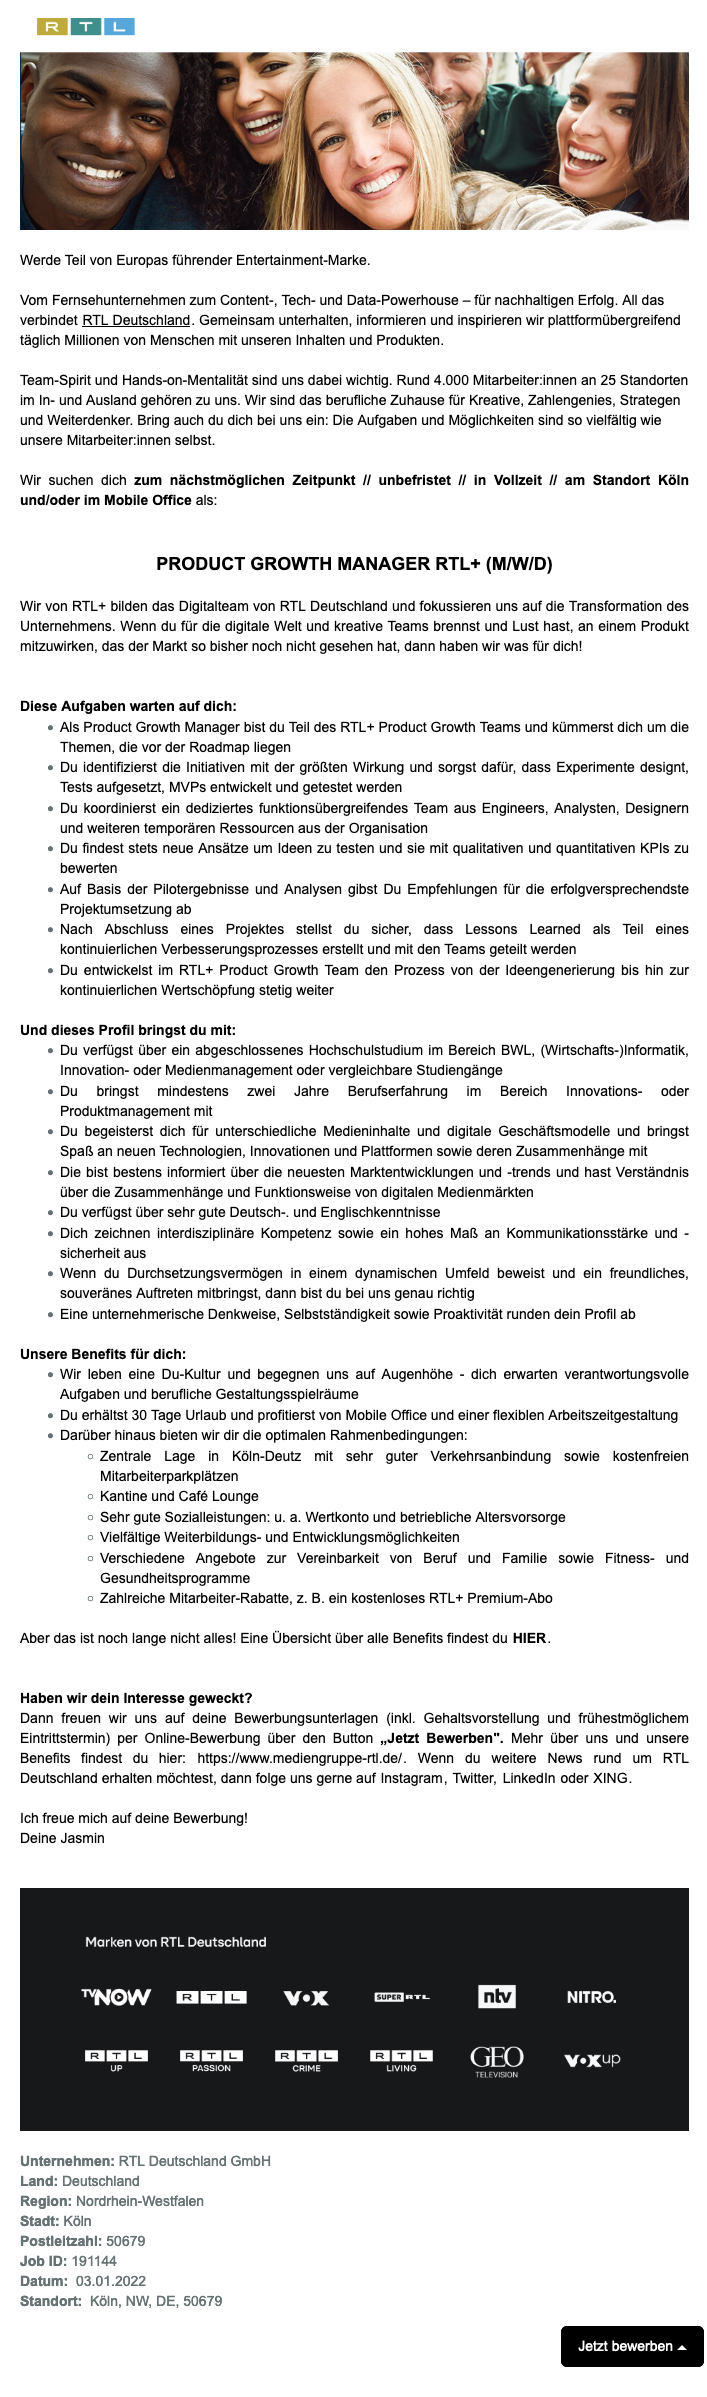 Product Growth Manager RTL+ (m/w/d) (RTL Interactive)